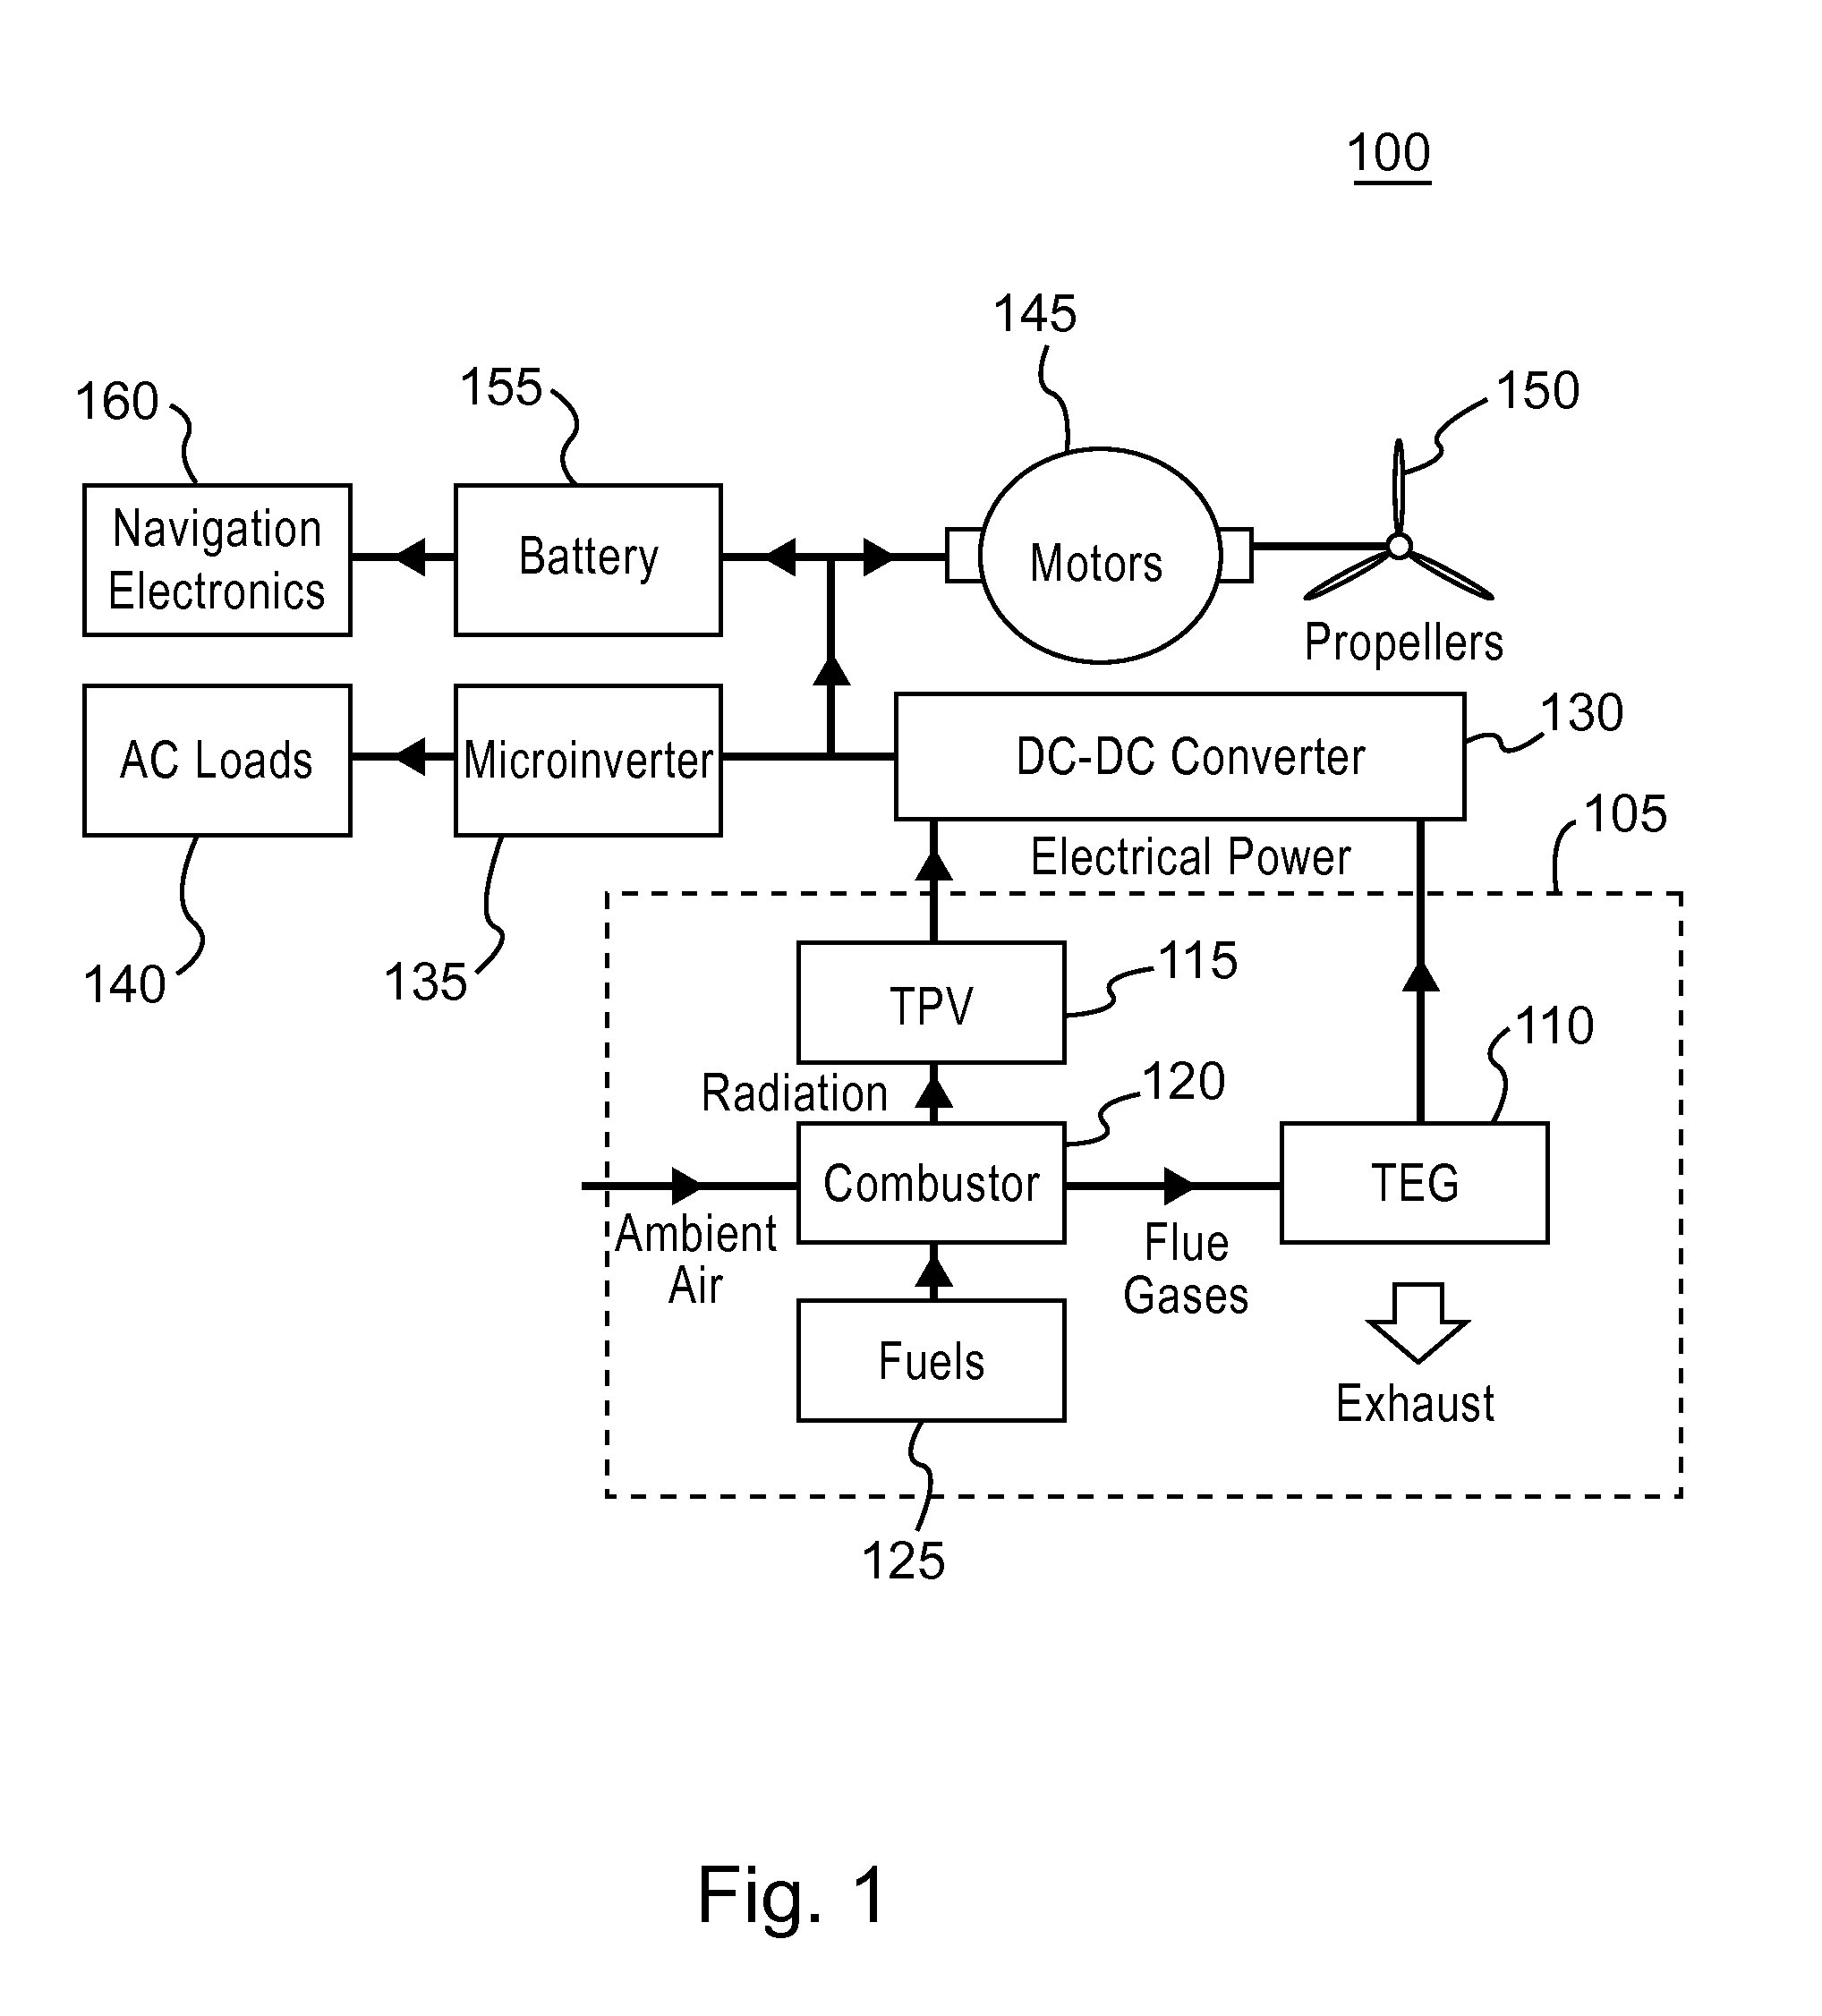 Hybrid propulsion power system for aerial vehicles